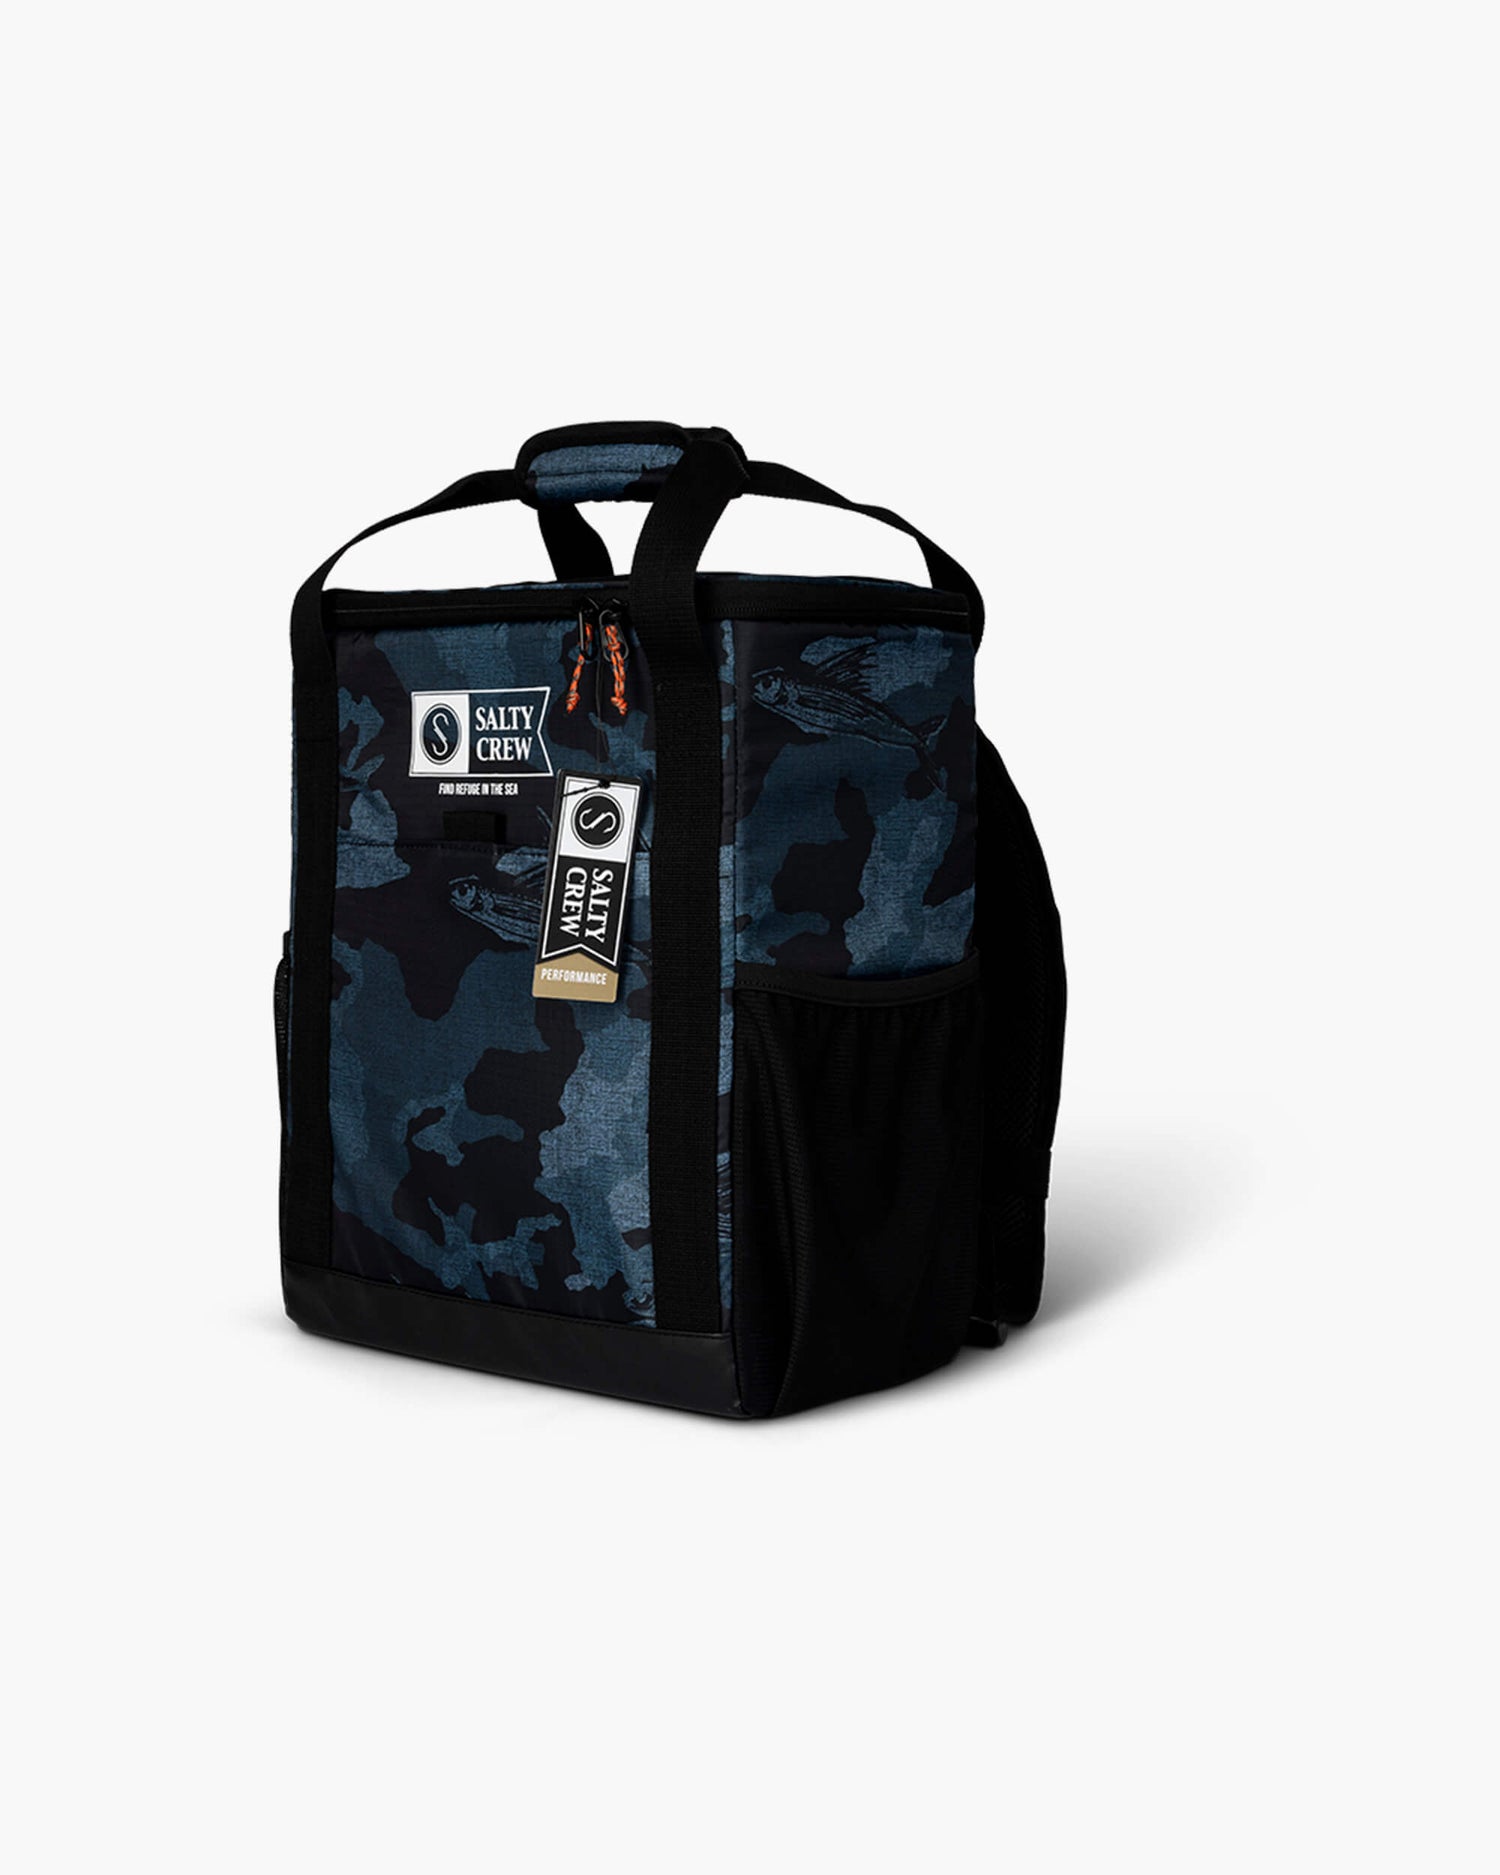 Salty crew BAGS Chiller Cooler Backpack - Blue Camo  in Blue Camo